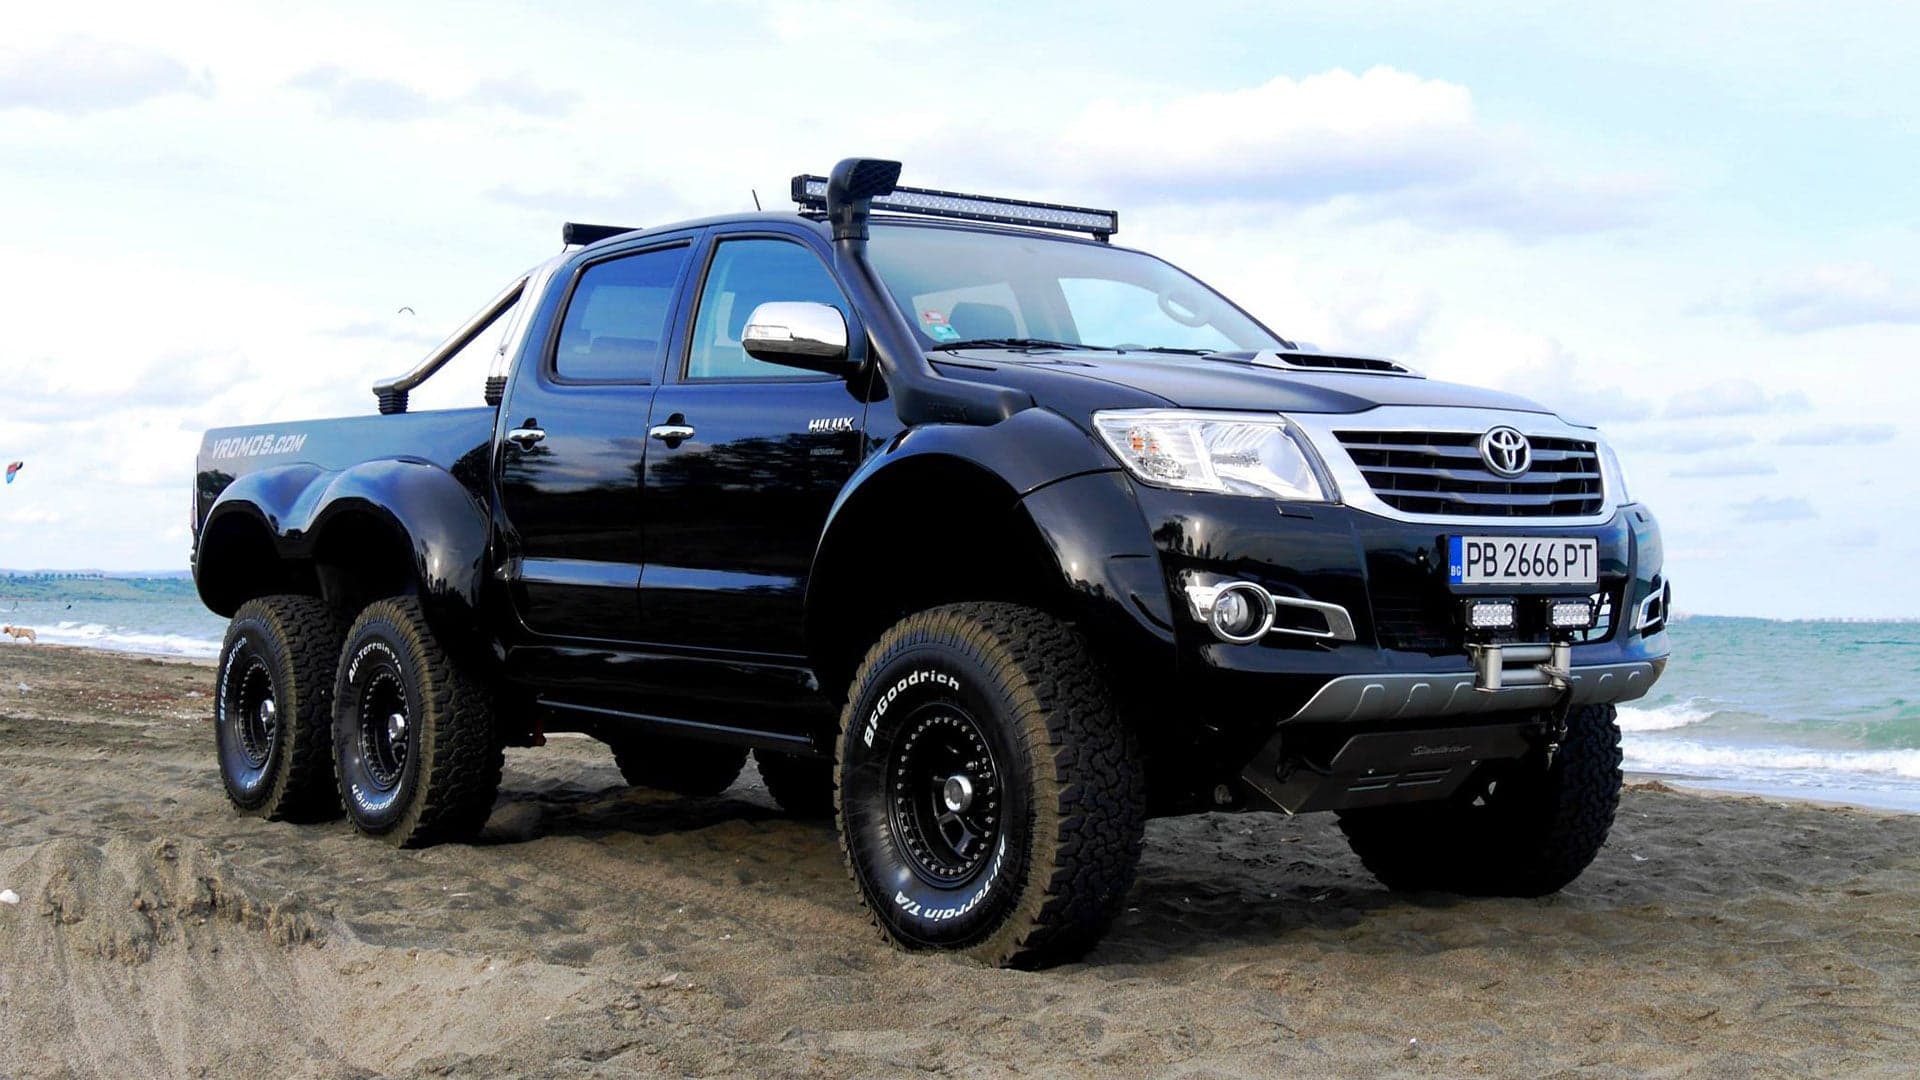 Bulgaria Has Built the Best Toyota Hilux Ever